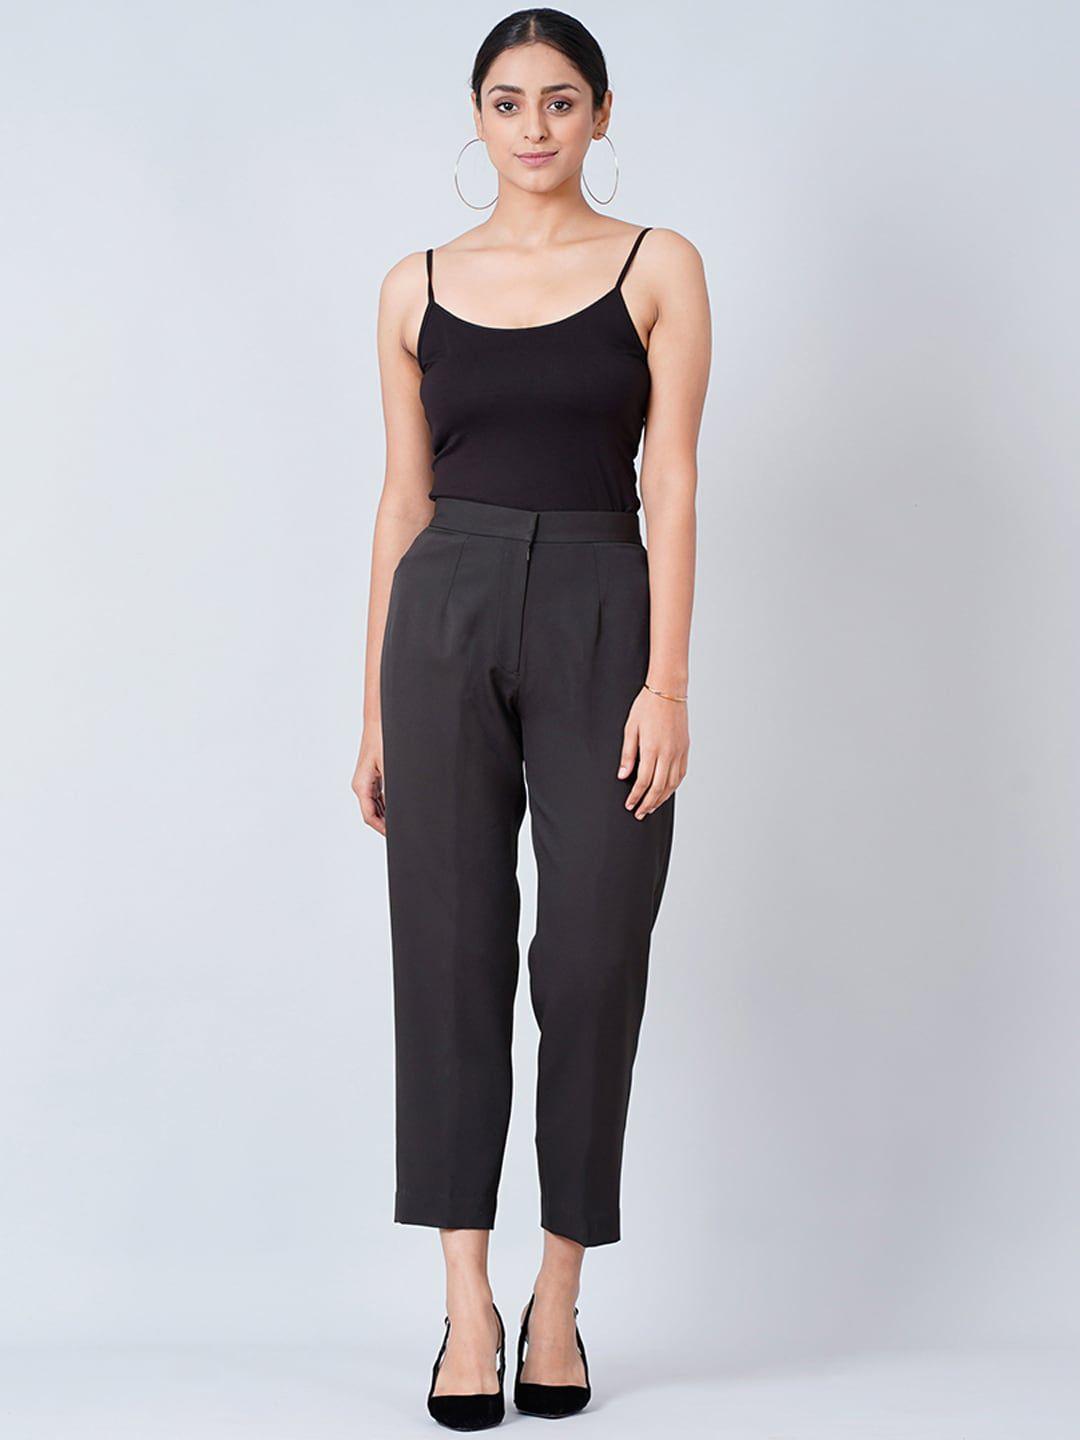 first-resort-by-ramola-bachchan-women-smart-slim-fit-mid-rise-trousers